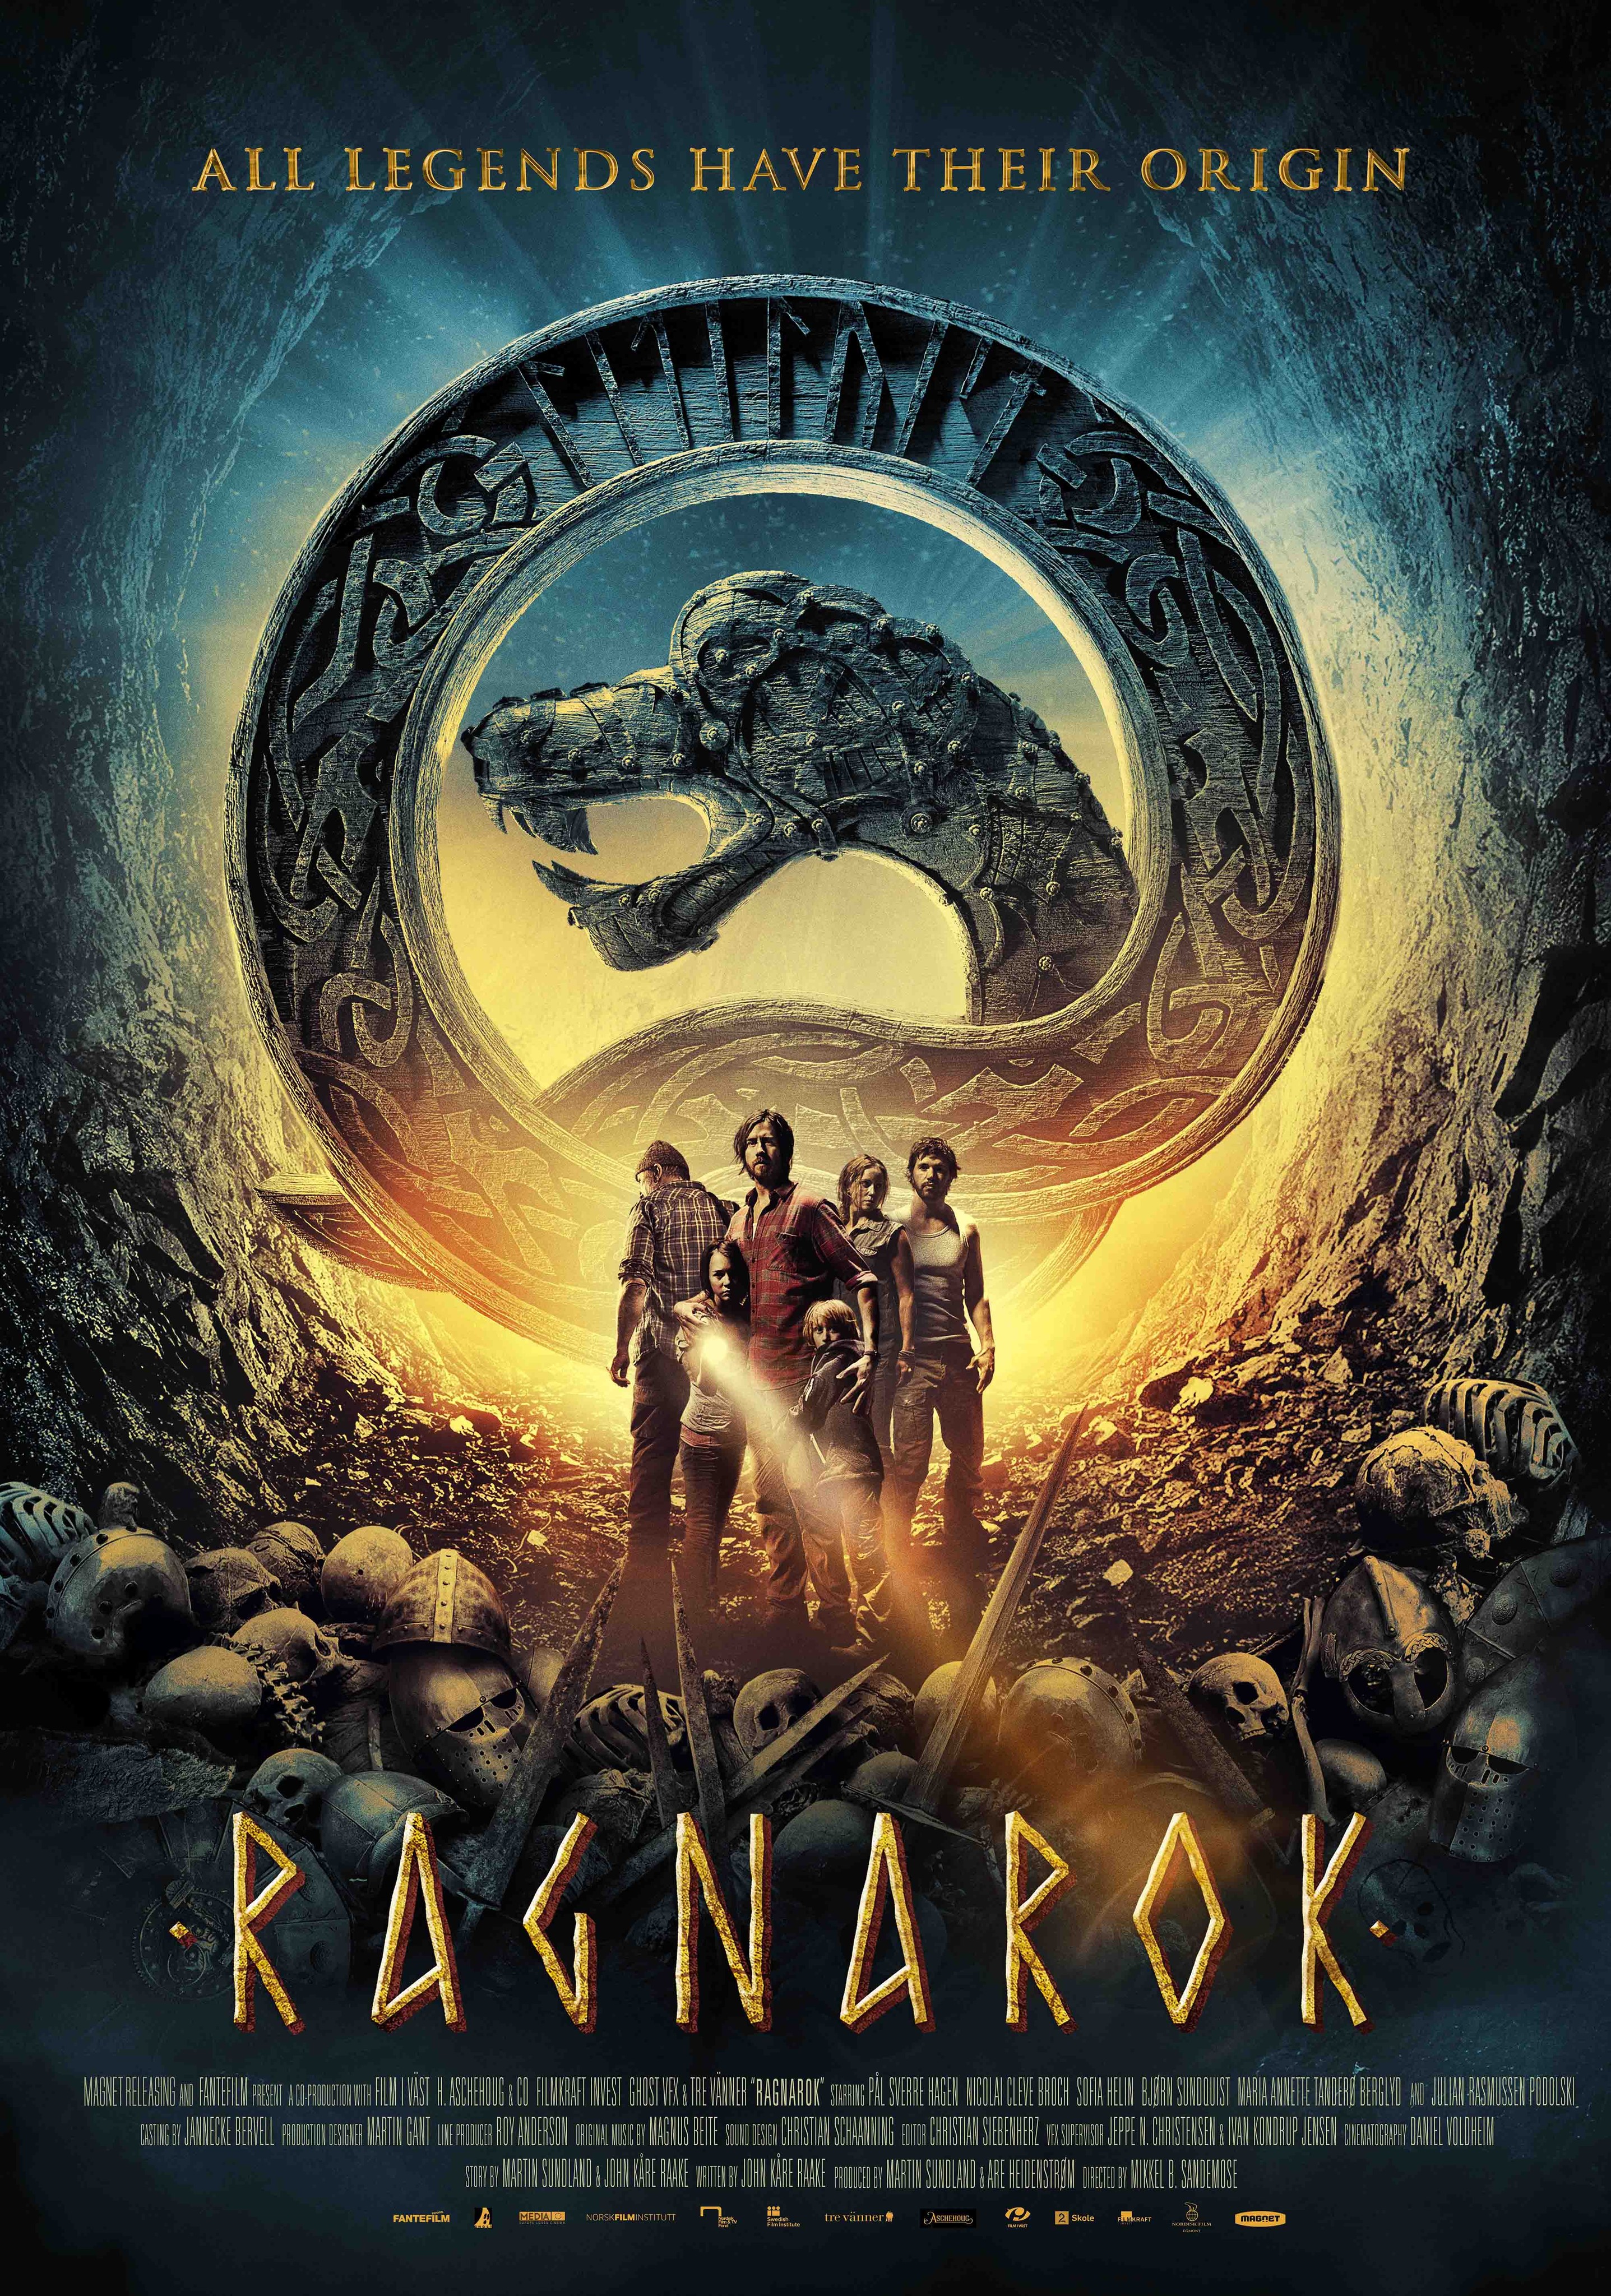 Record Of Ragnarok: The Complete First Season (blu-ray)(2023) : Target